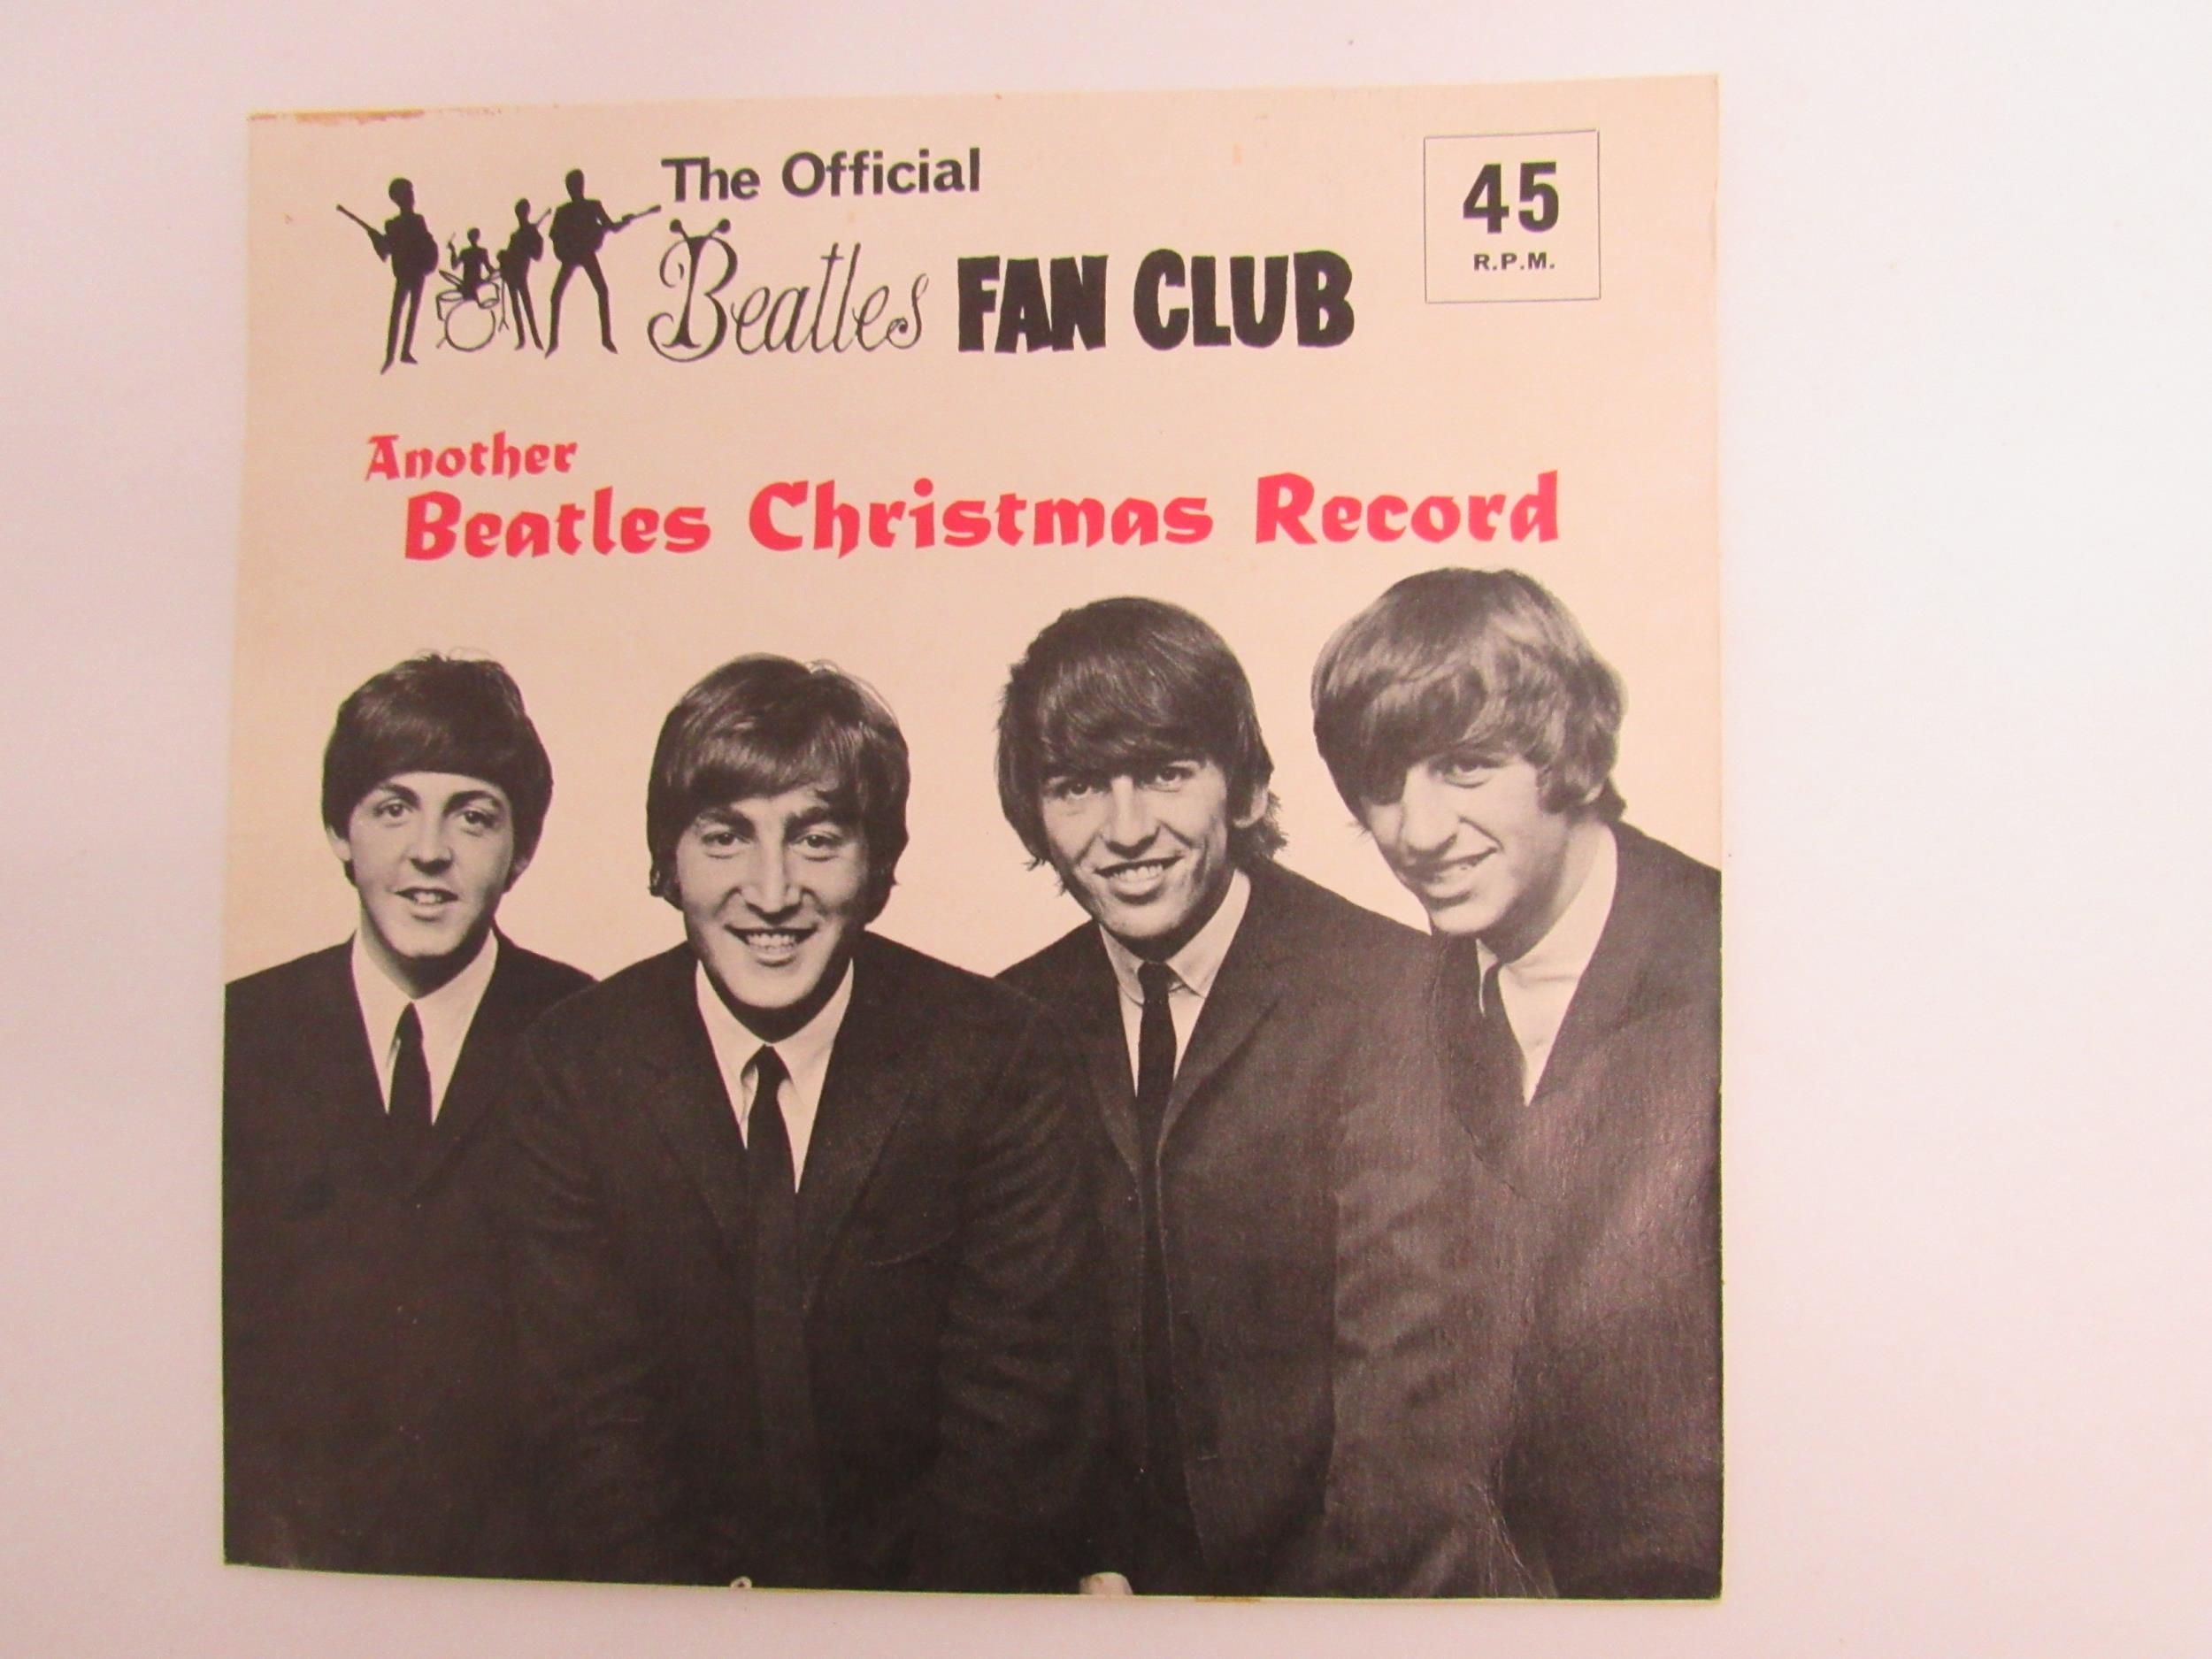 THE BEATLES: Two Beatles Official Fan Club Christmas 7" flexi-discs to include 'The Beatles - Image 8 of 10